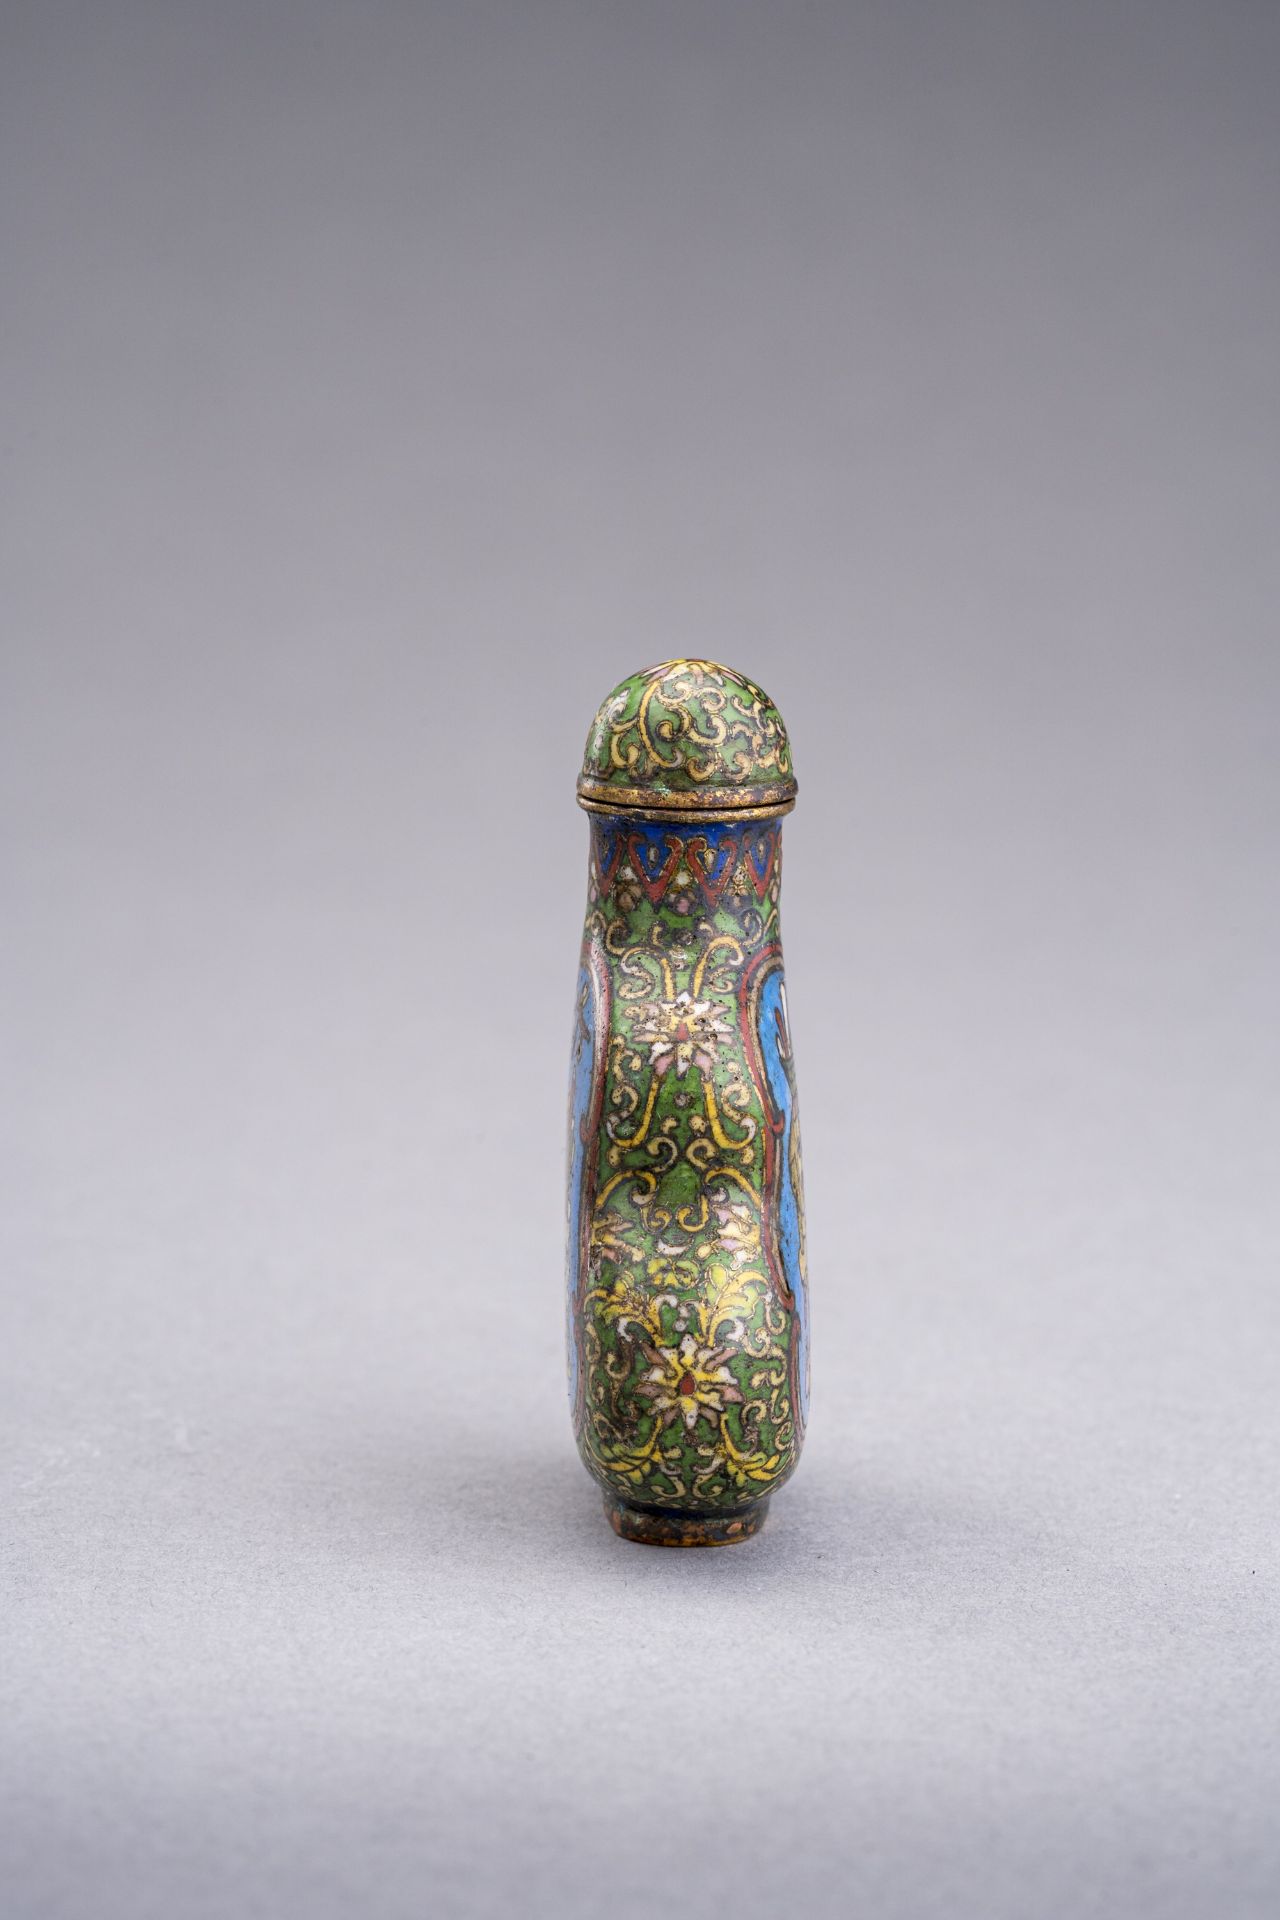 A DOUBLE-GOURD CLOISSONNE SNUFF BOTTLE, QING DYNASTY - Image 2 of 6